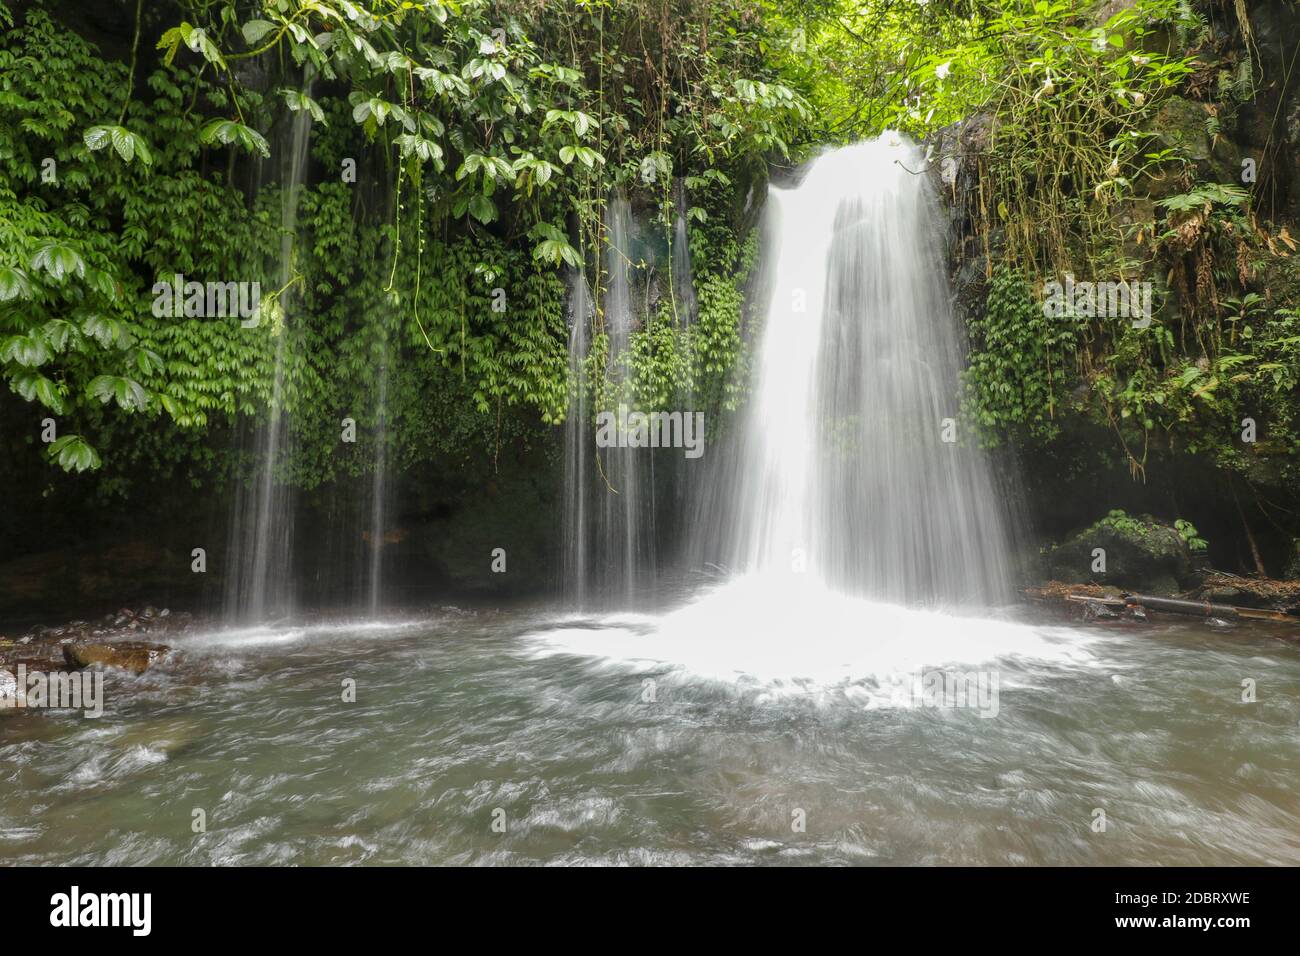 Yeh Ho Waterfall is located in the lush rice field-laden Penebel village in Tabanan. The stream of beautiful waterfall in the jungle in Jatiluwih area Stock Photo